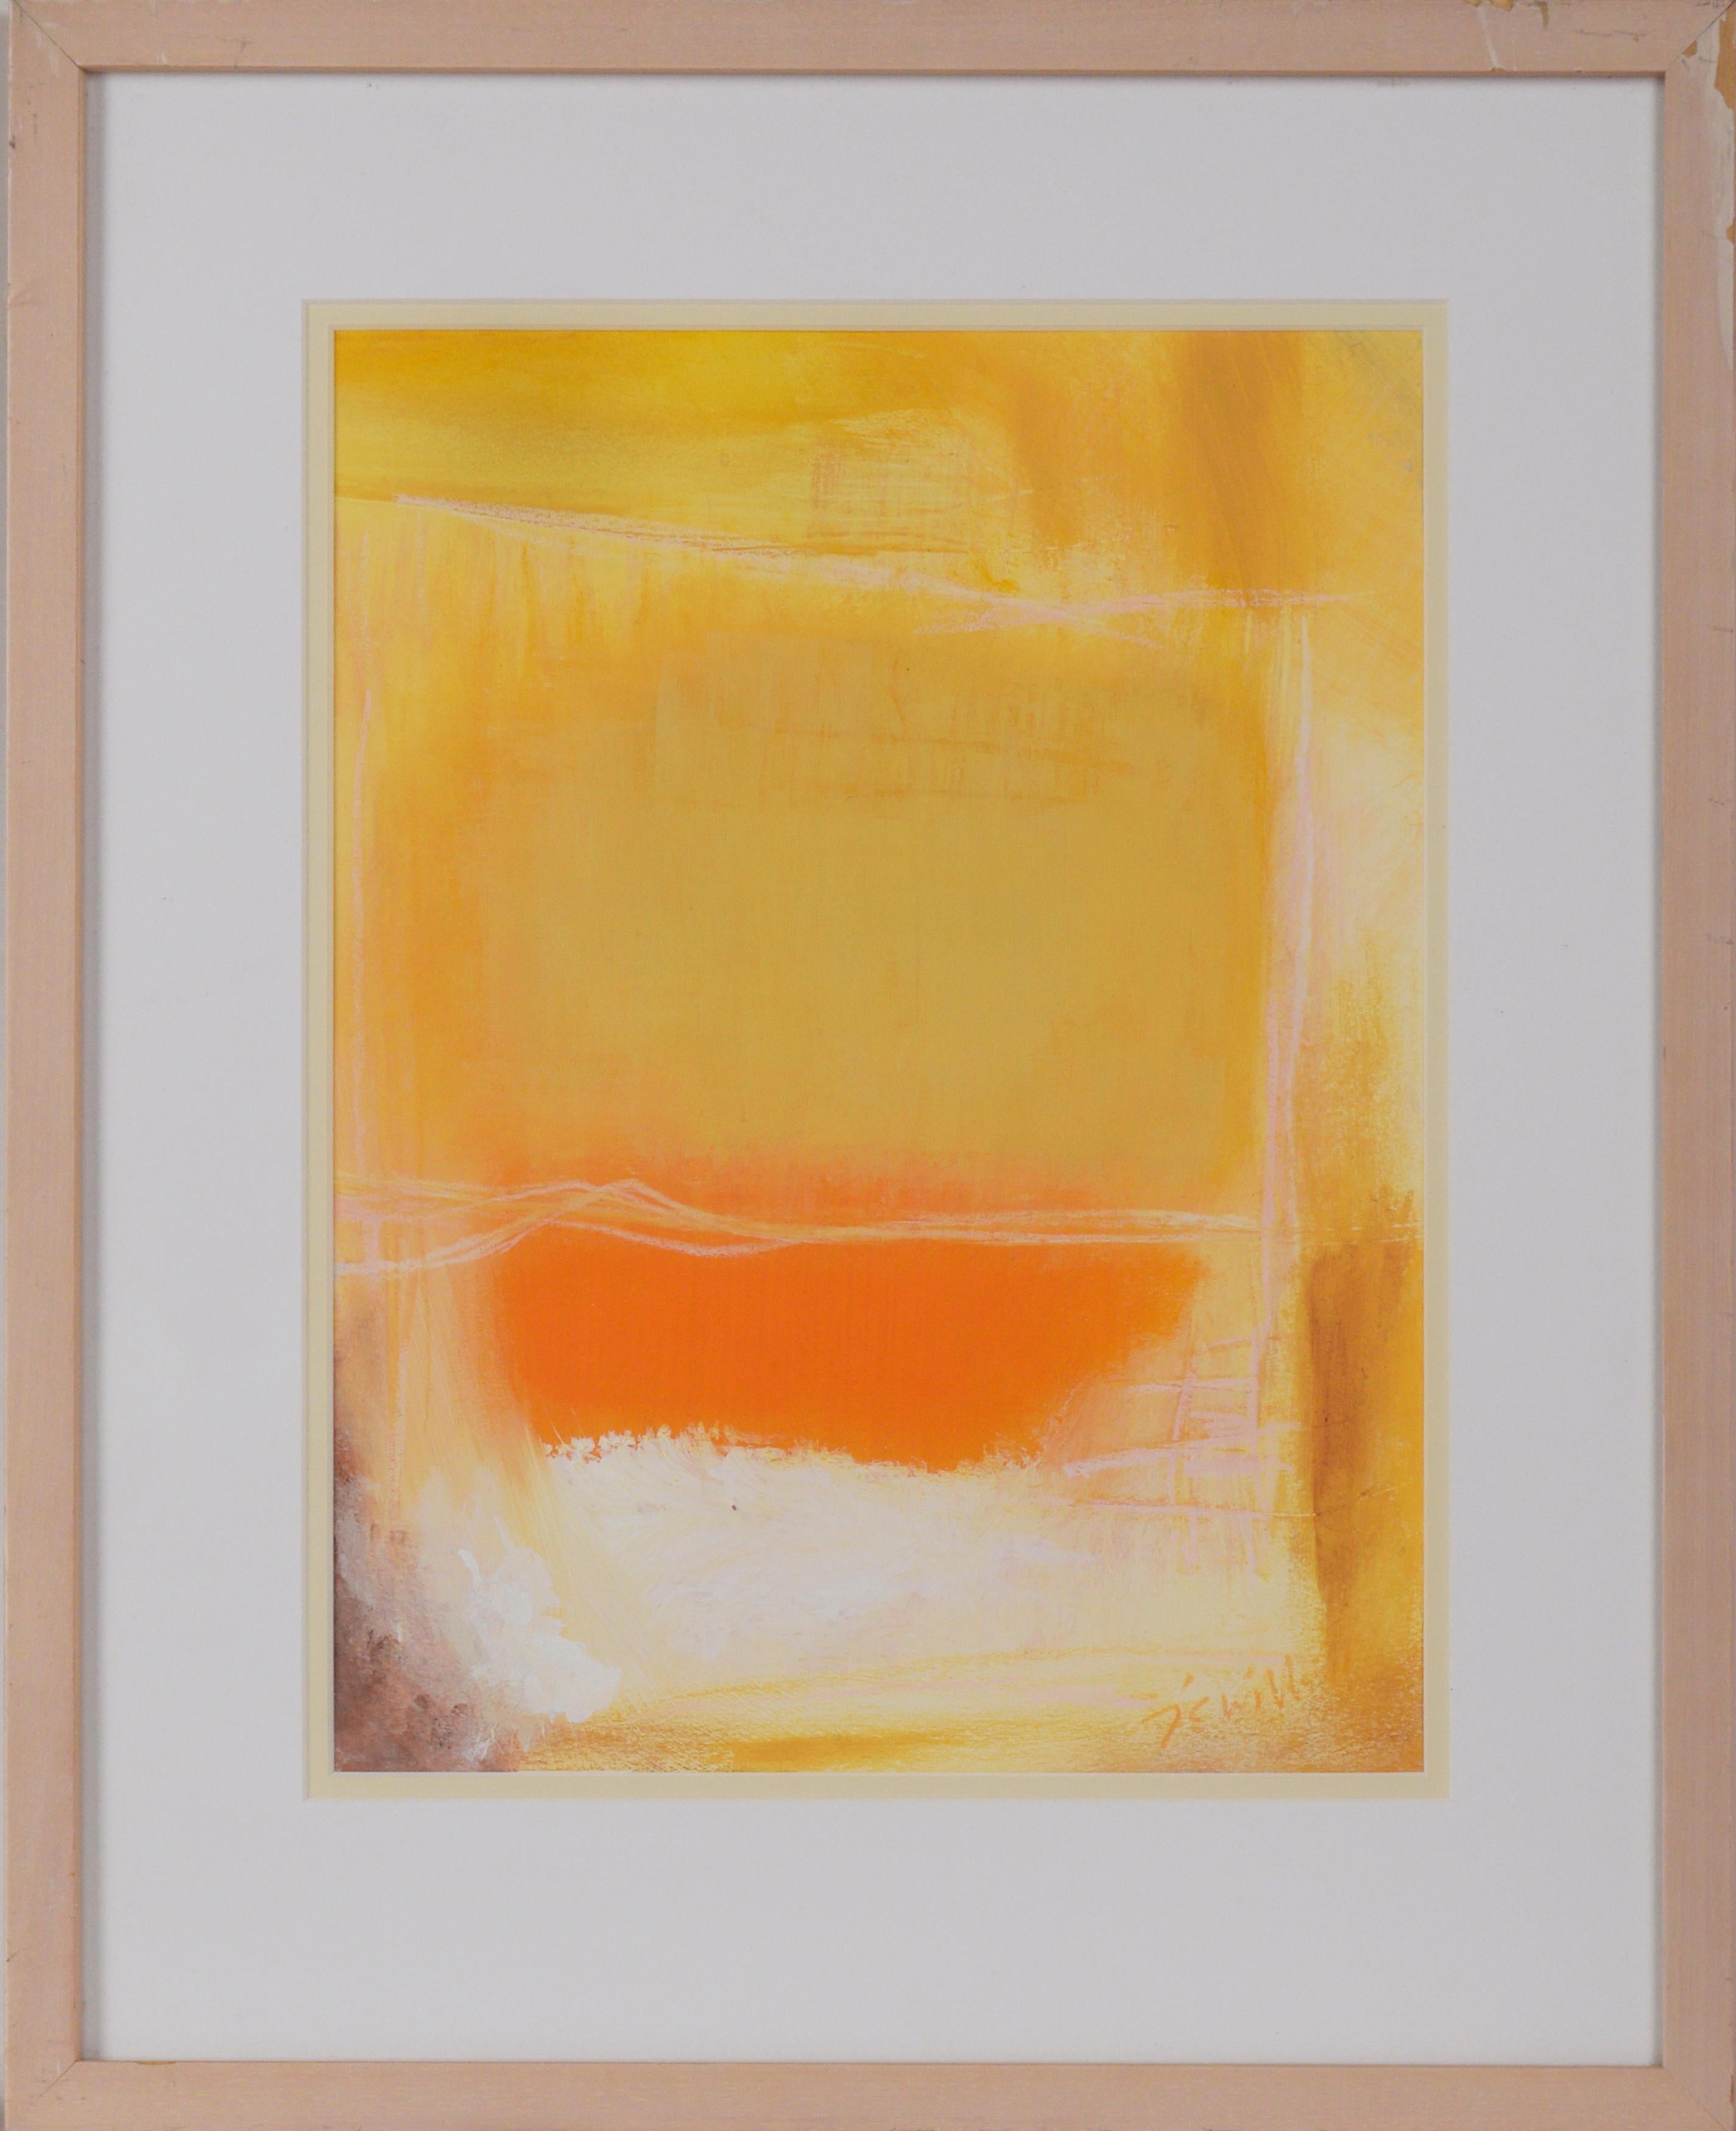 "Arising" - Abstract Fauvist - Style of Rothko in Acrylic on Paper

Abstract painting depicting a faint yellow watercolor background with different hues of yellow along the borders, merging into the middle while blending with tones of orange and